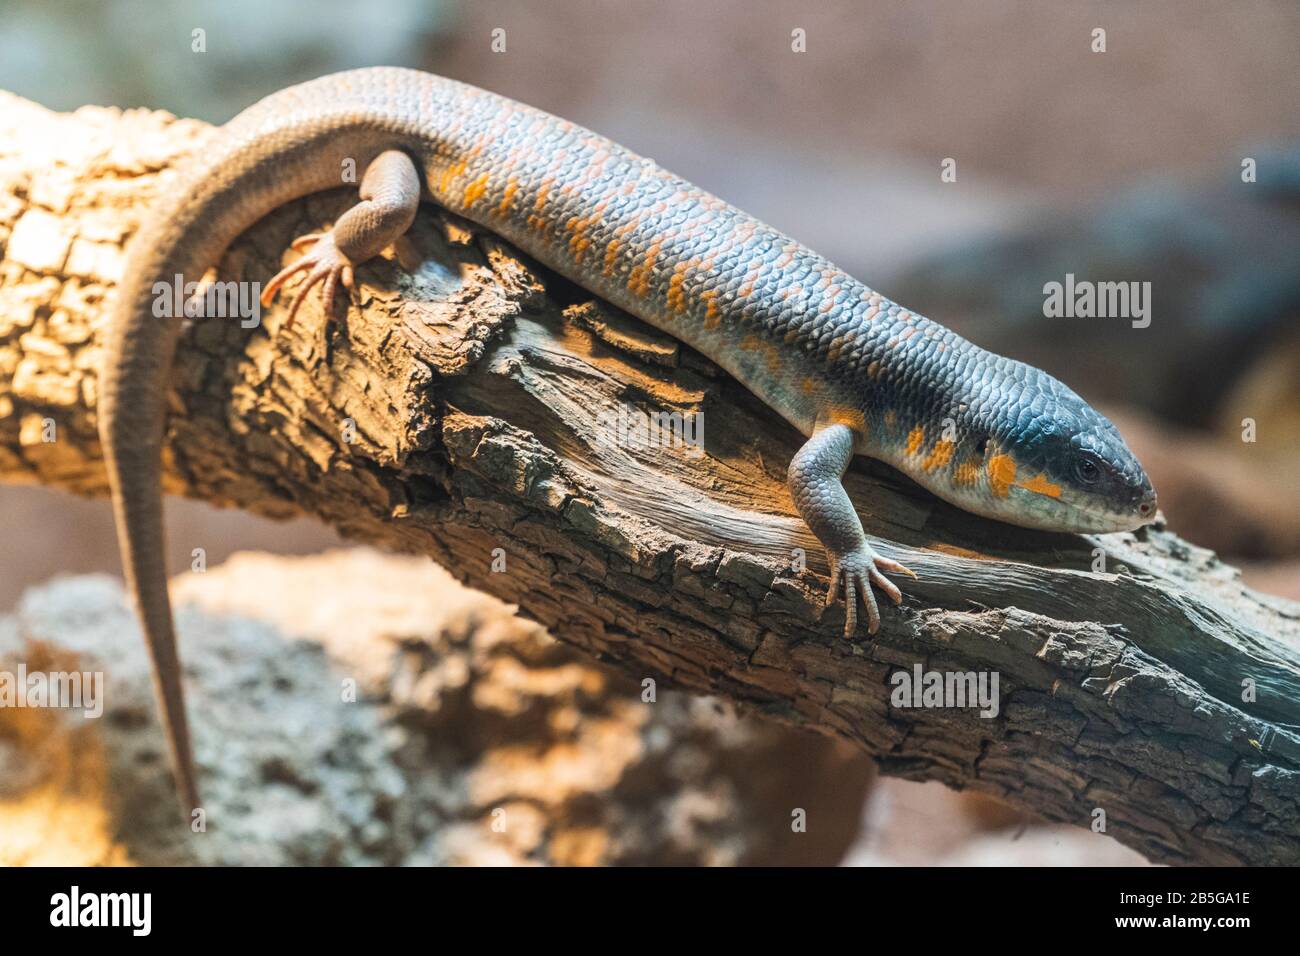 close up view of skink lizard on a tree brunch Stock Photo